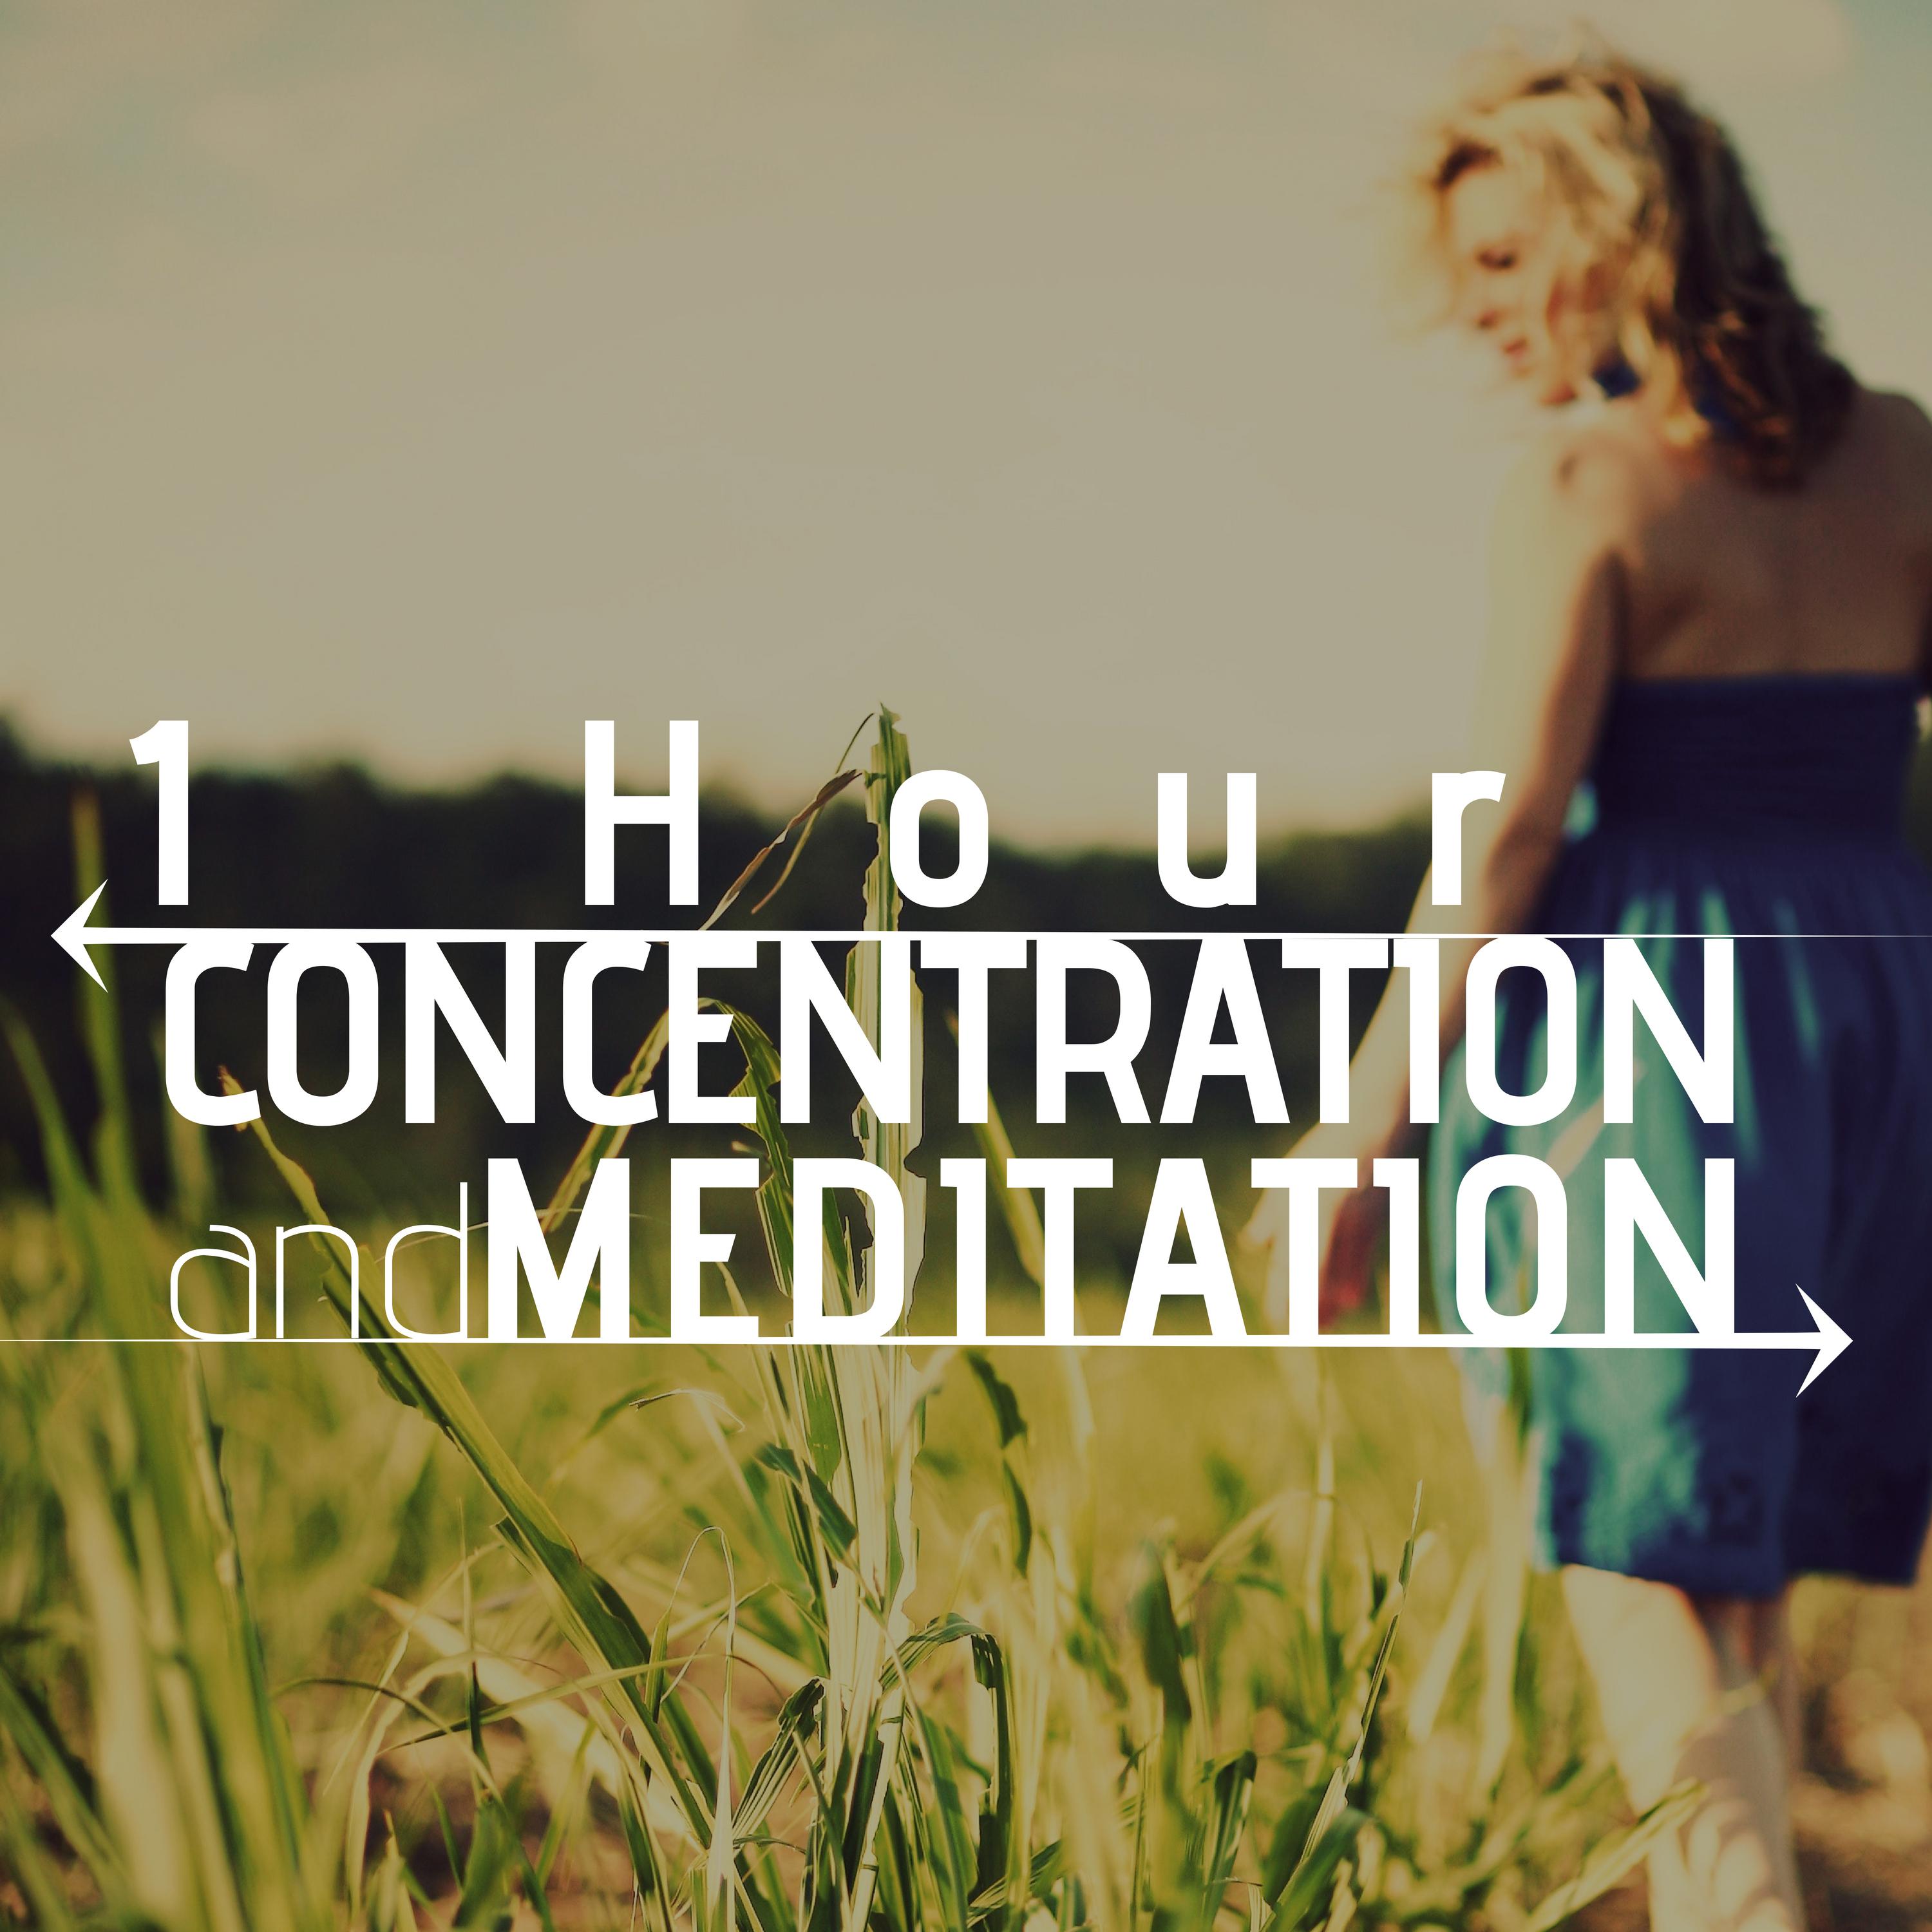 1 Hour of Concentration and Meditation